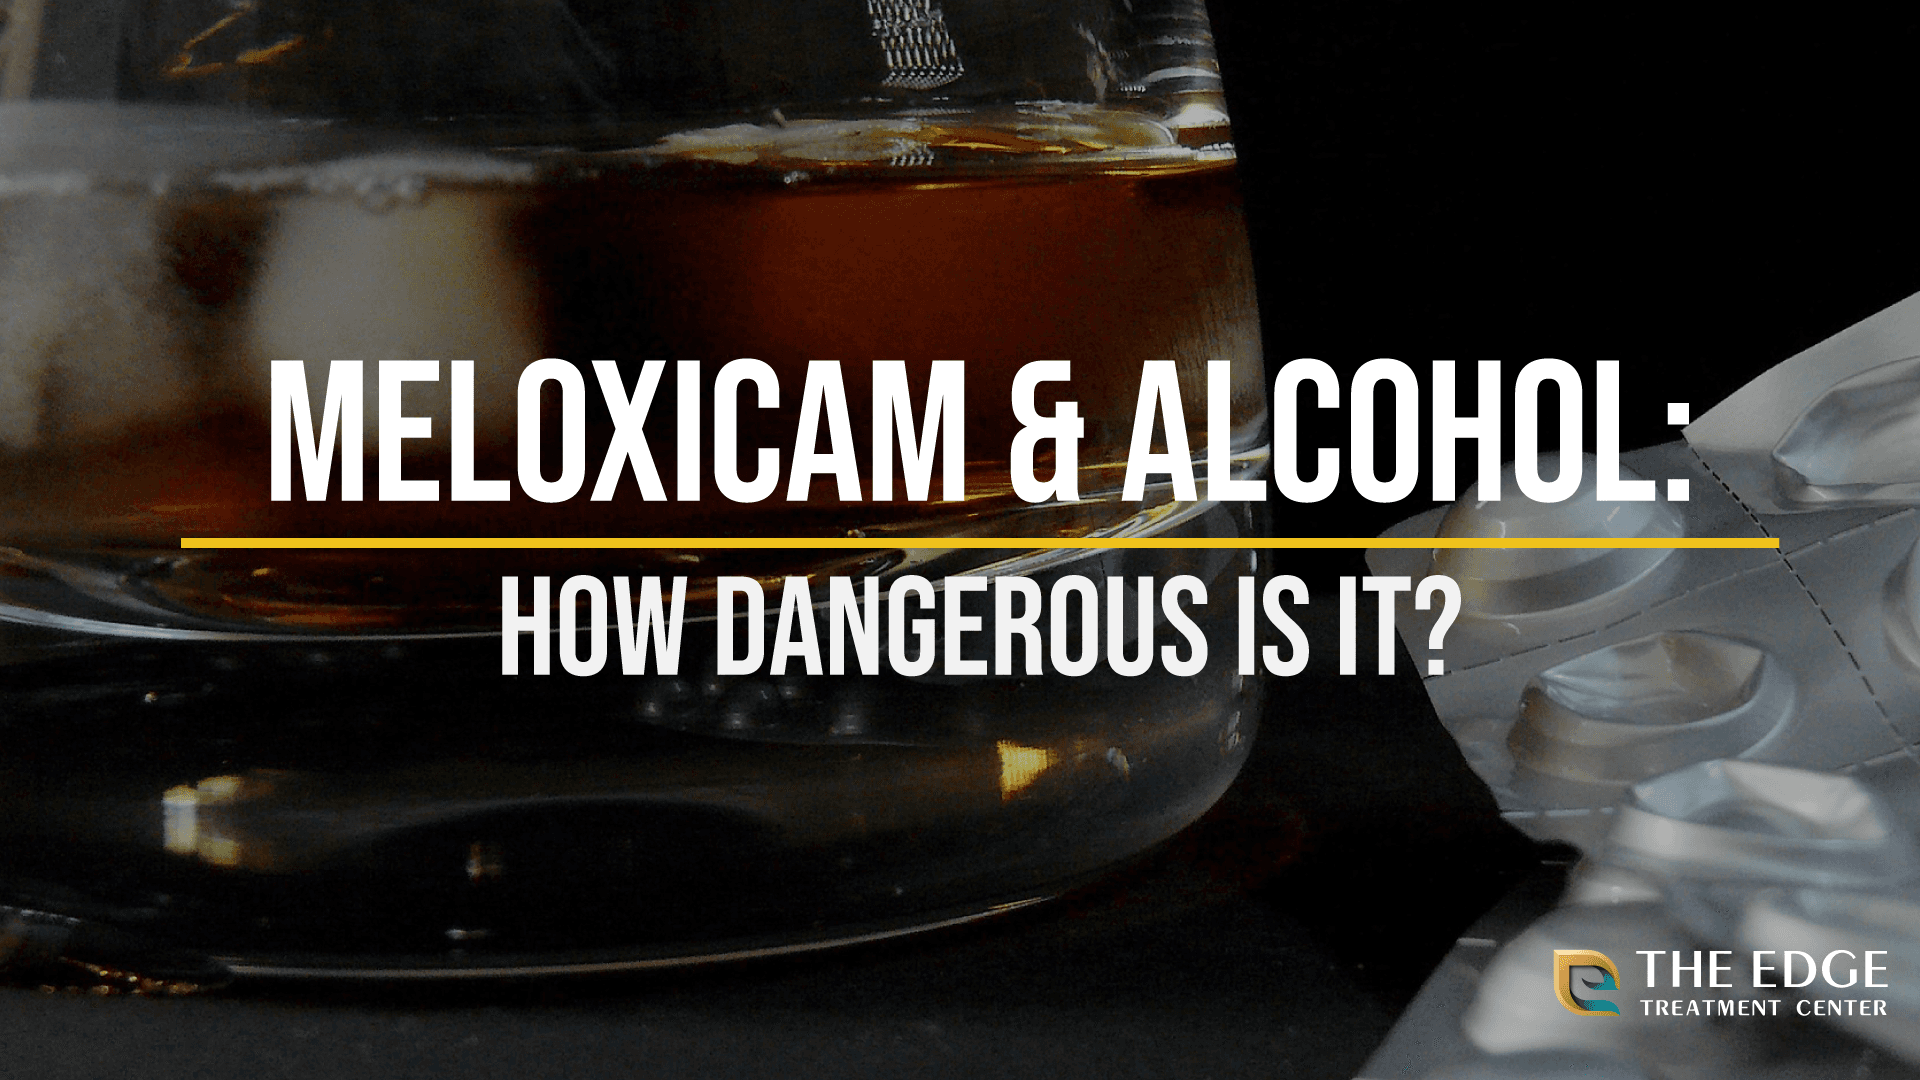 What Happens When You Mix Meloxicam And Alcohol?